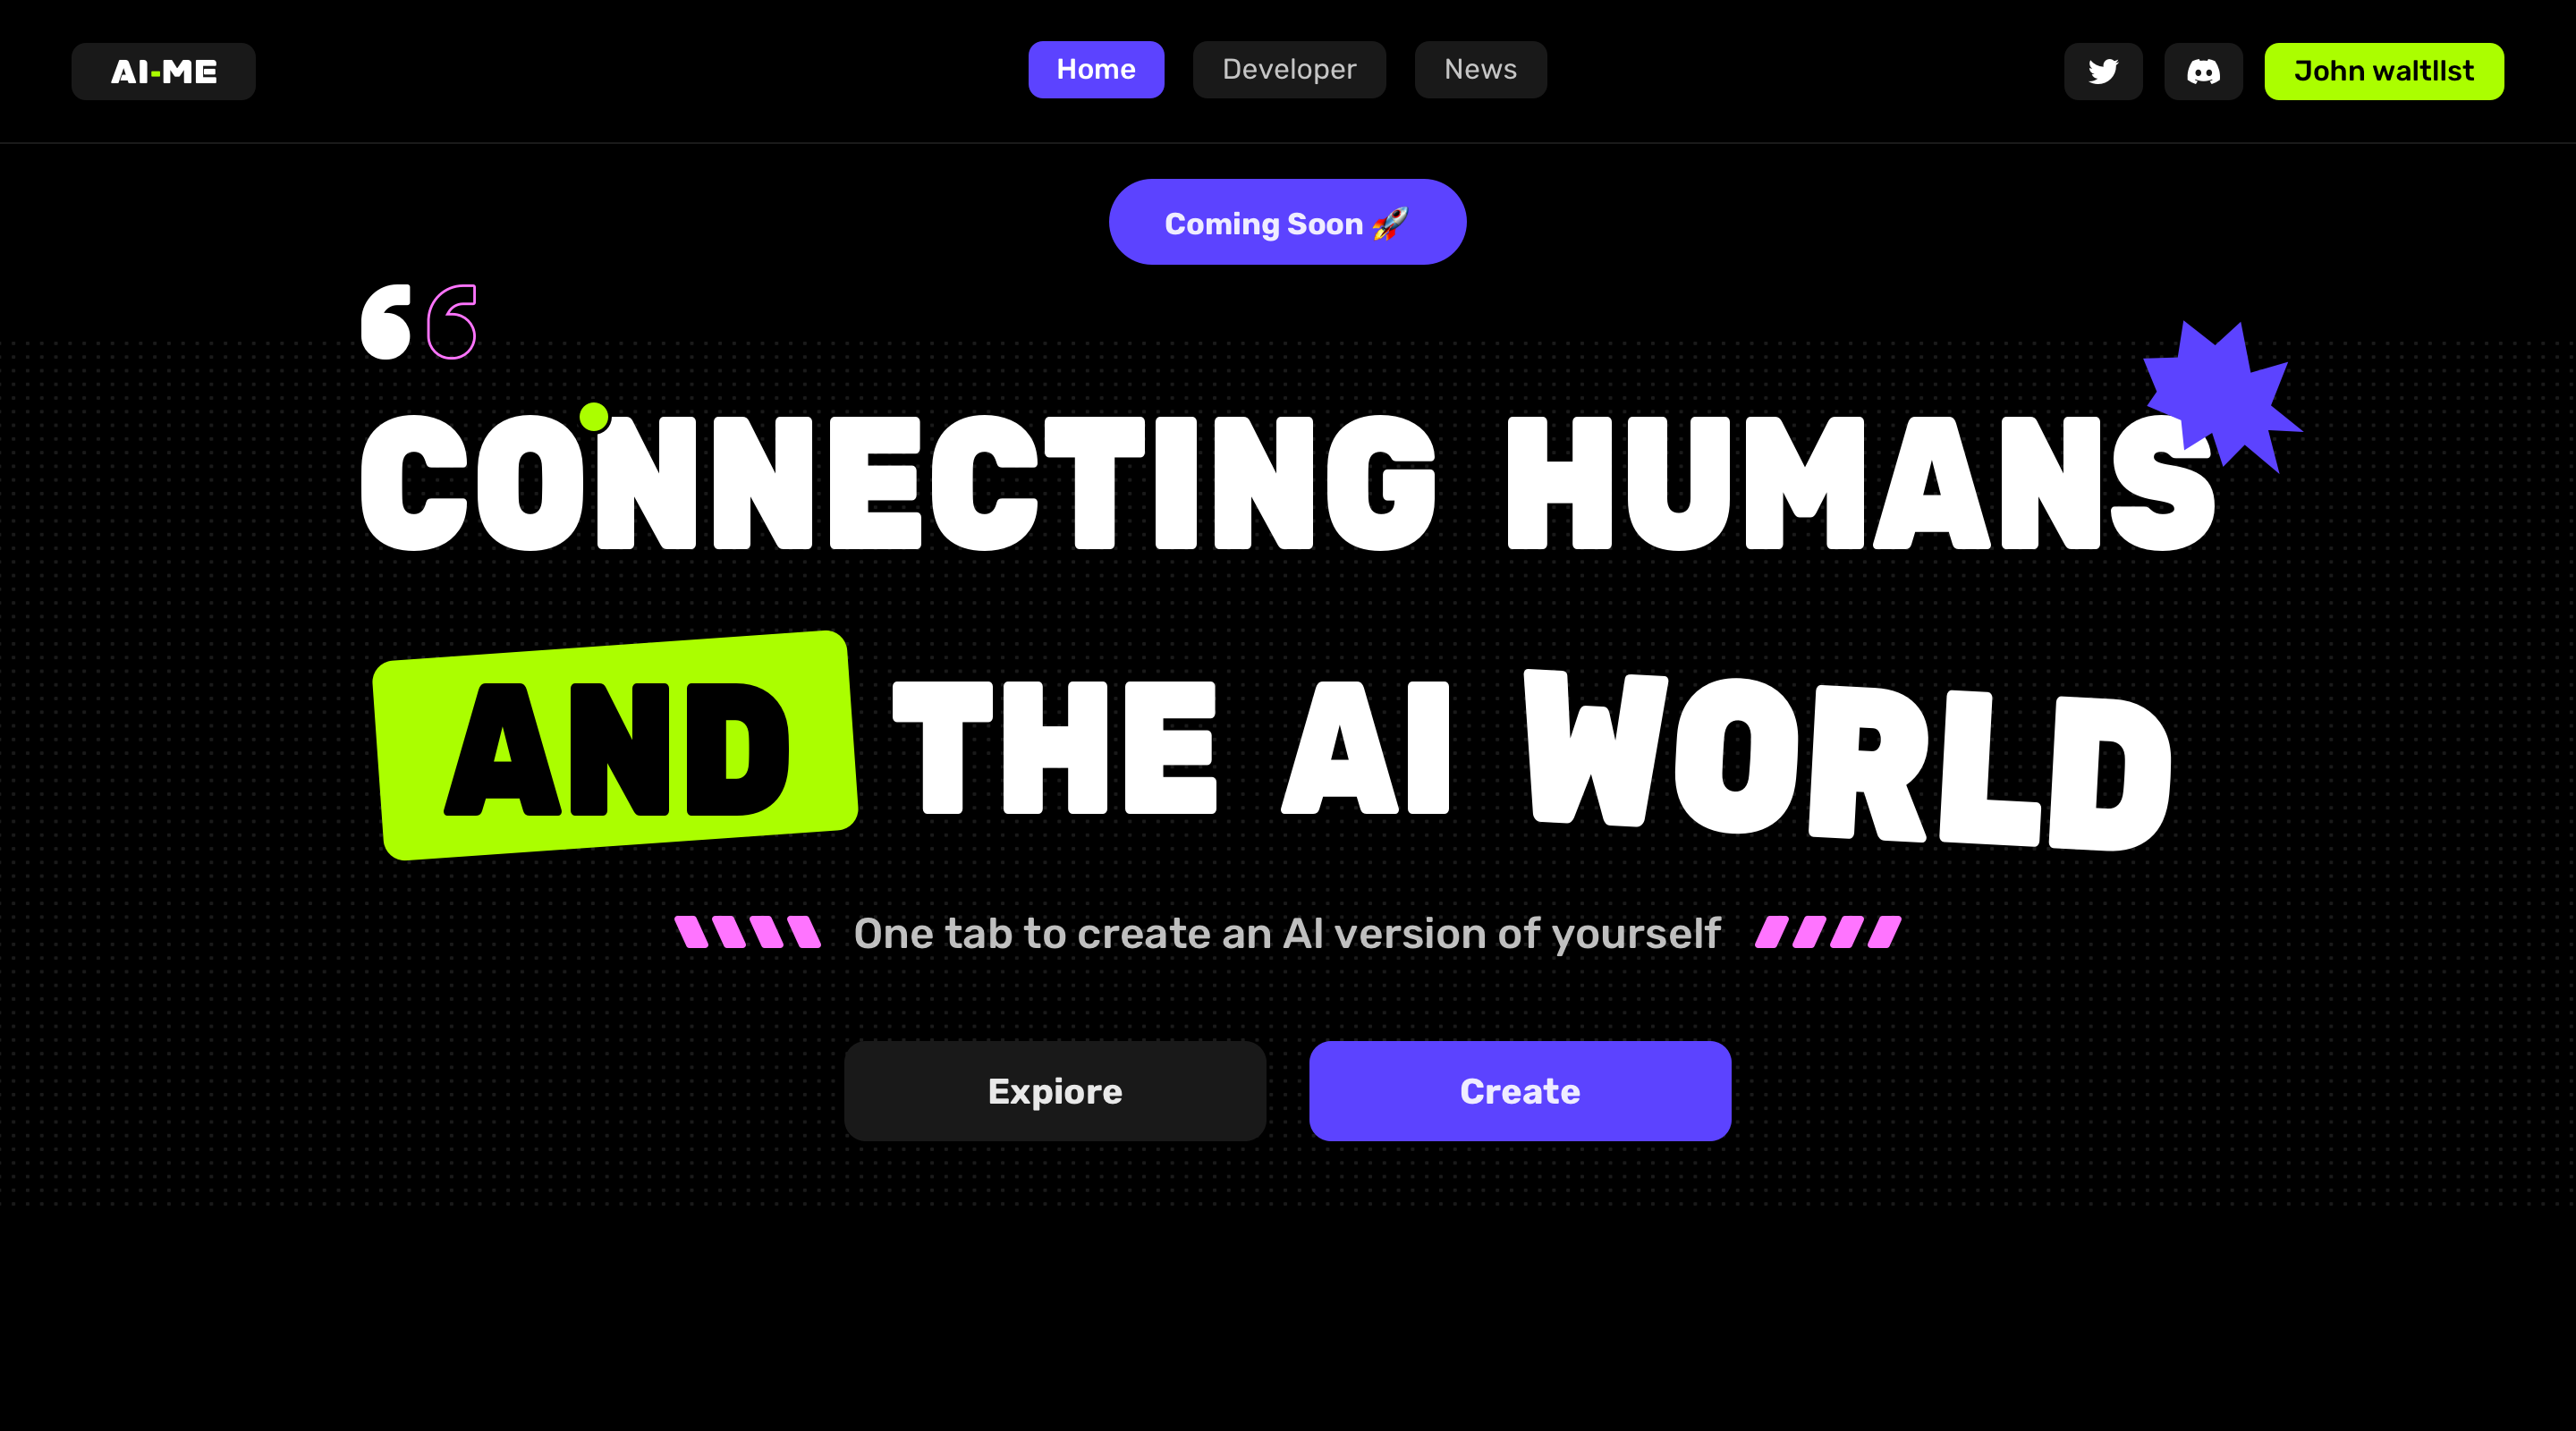 startuptile AI-ME-Connecting humans and the AI world